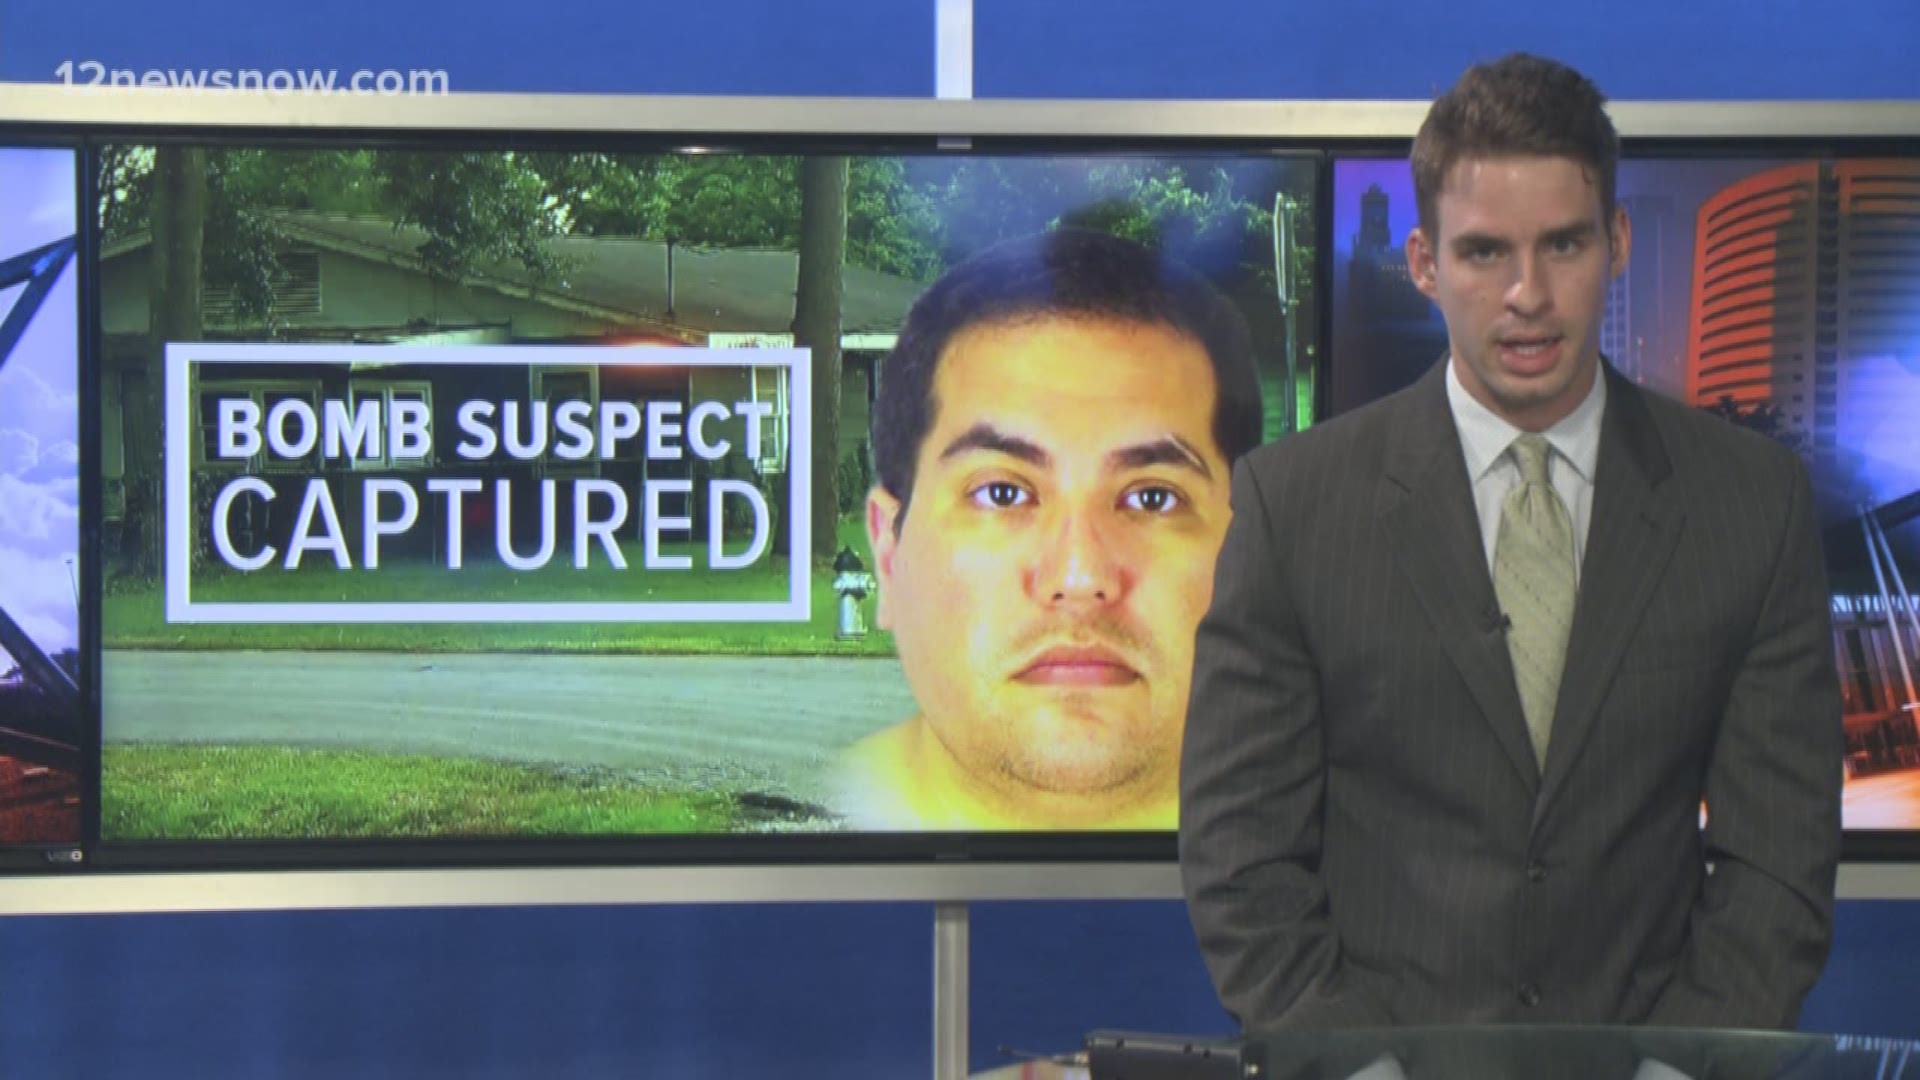 12News reporter William Blanchett digs into the background of Beaumont bombing suspect